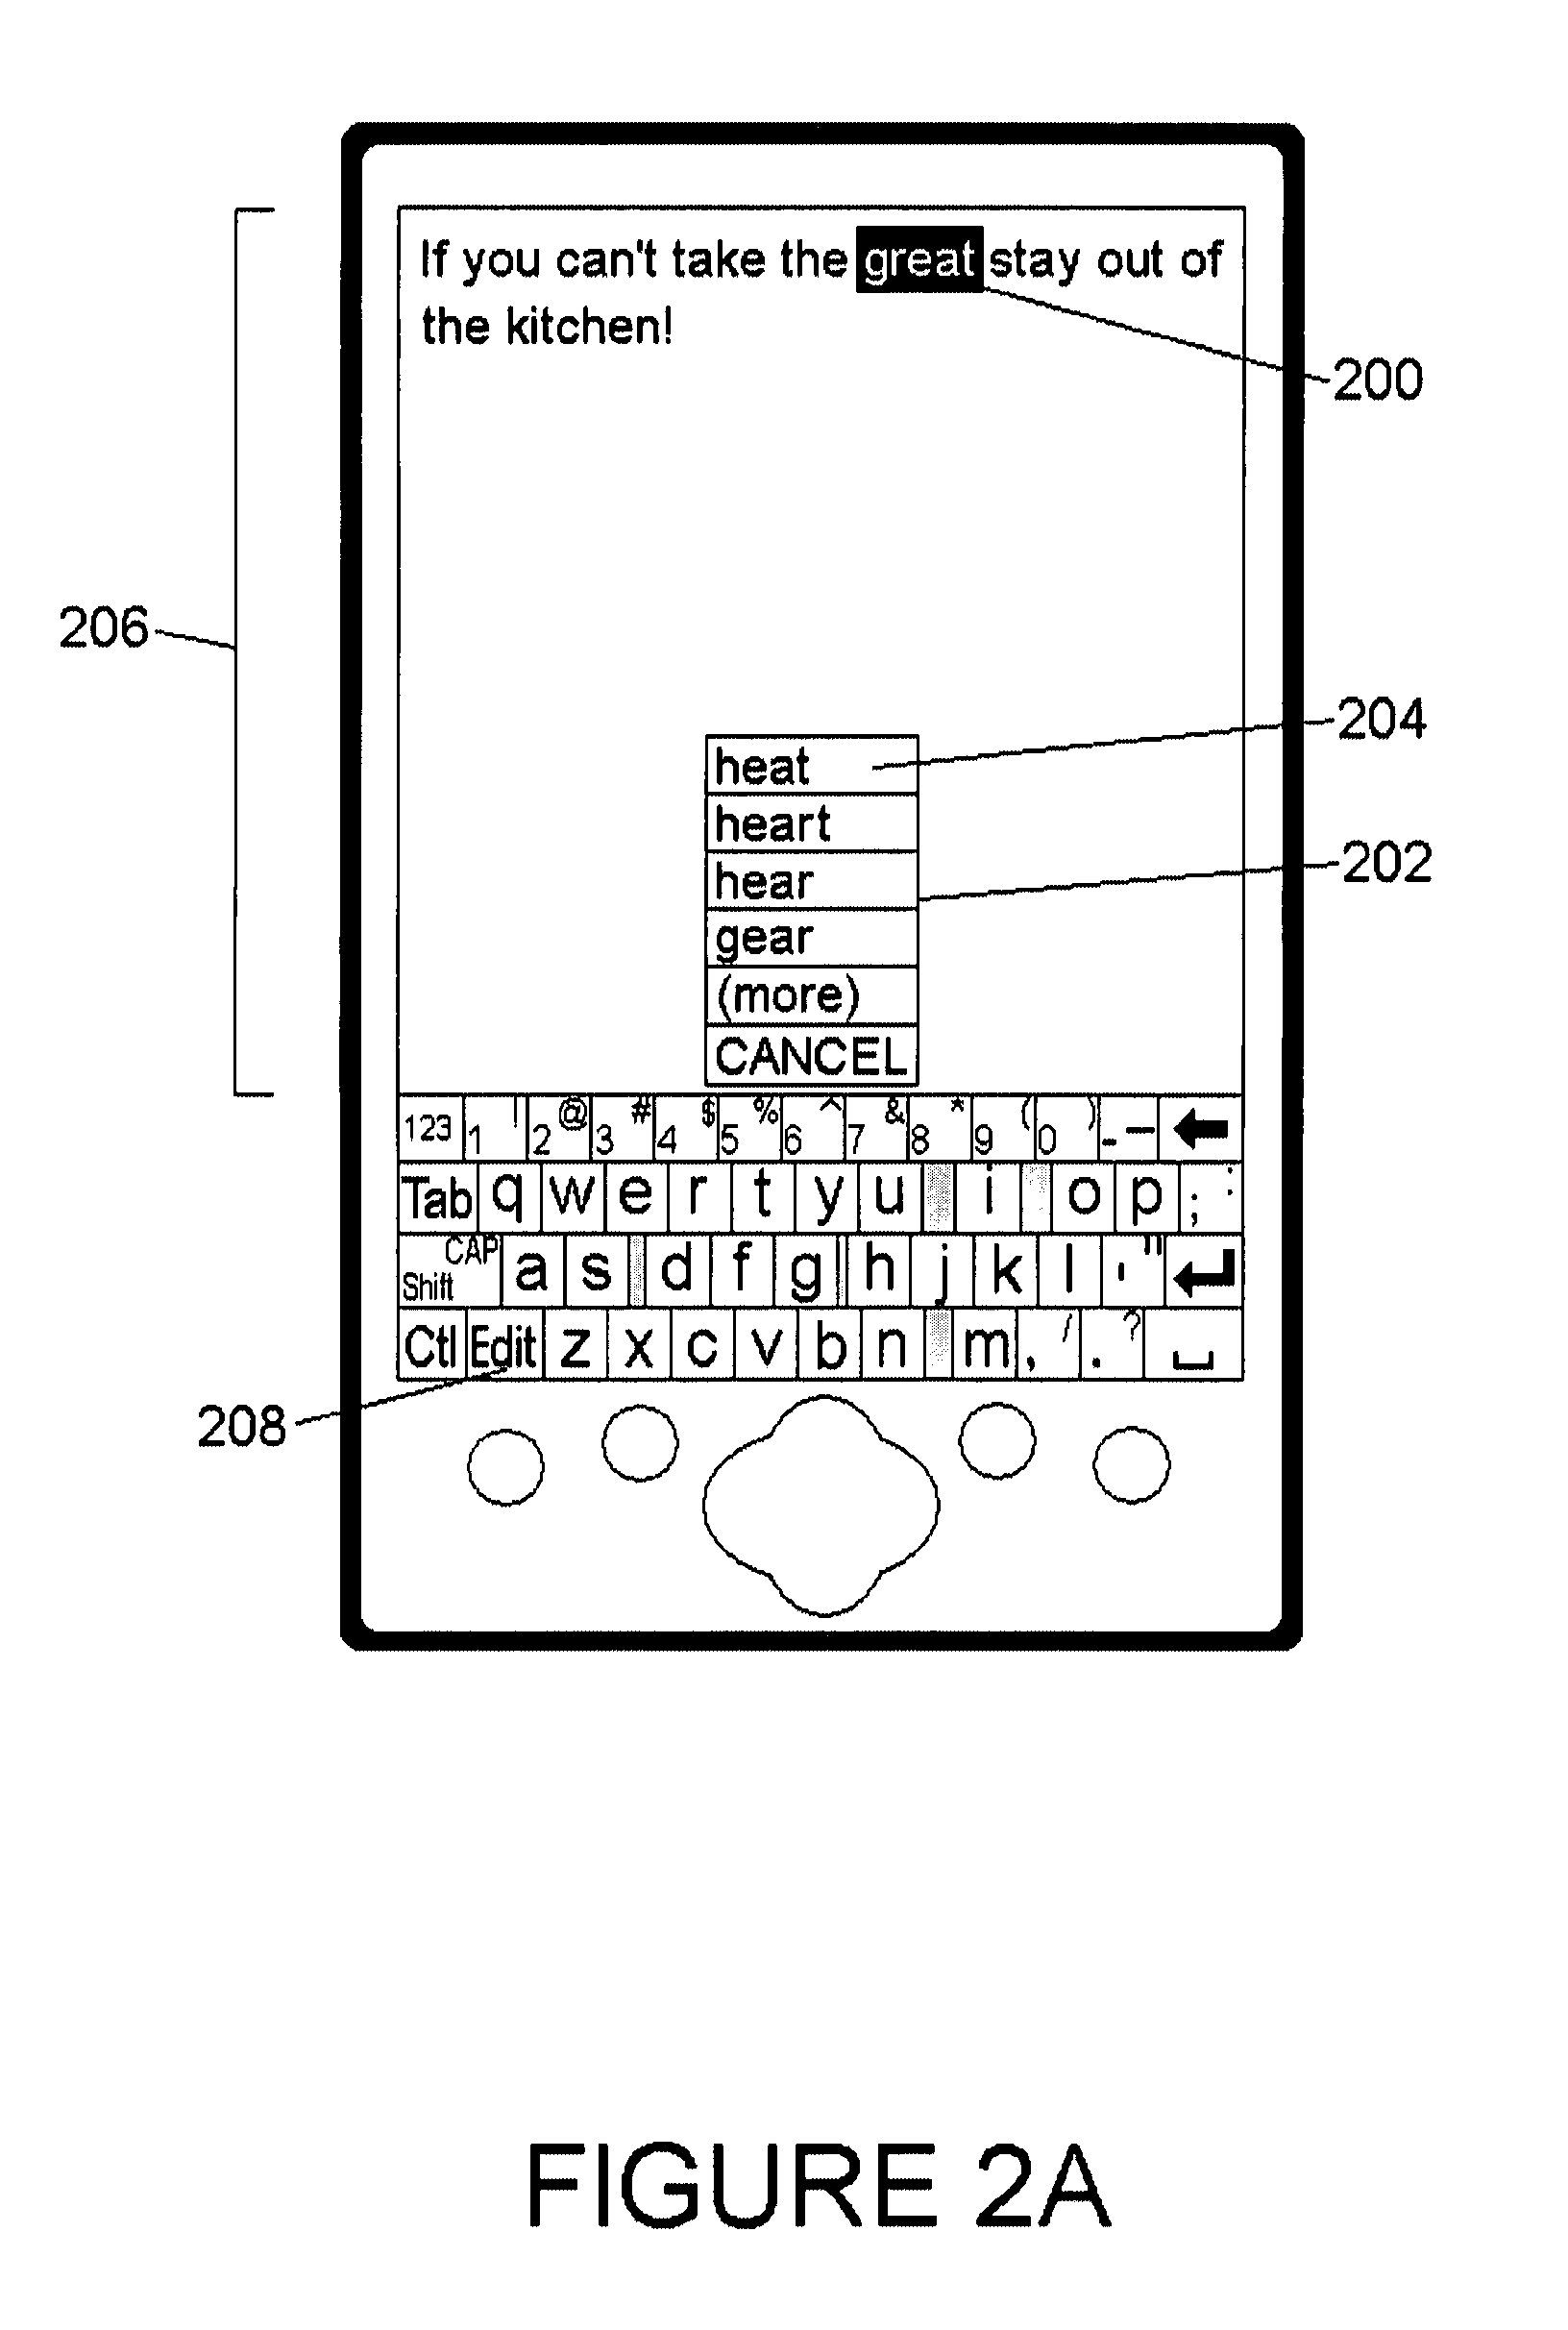 System and method for a user interface for text editing and menu selection